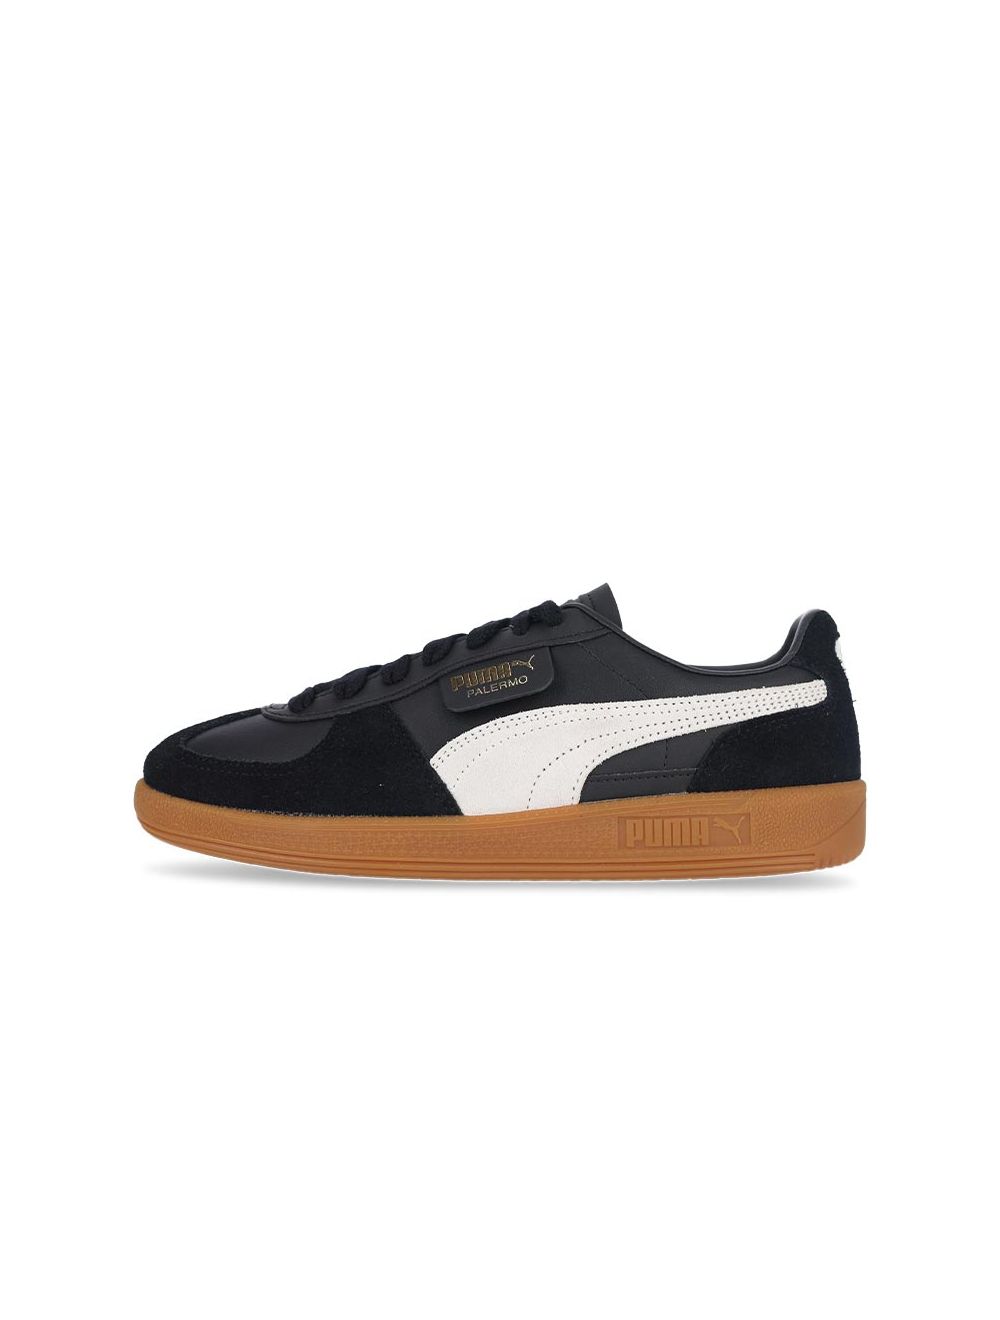 Puma Palermo 'Black & White' Available Now – Feature